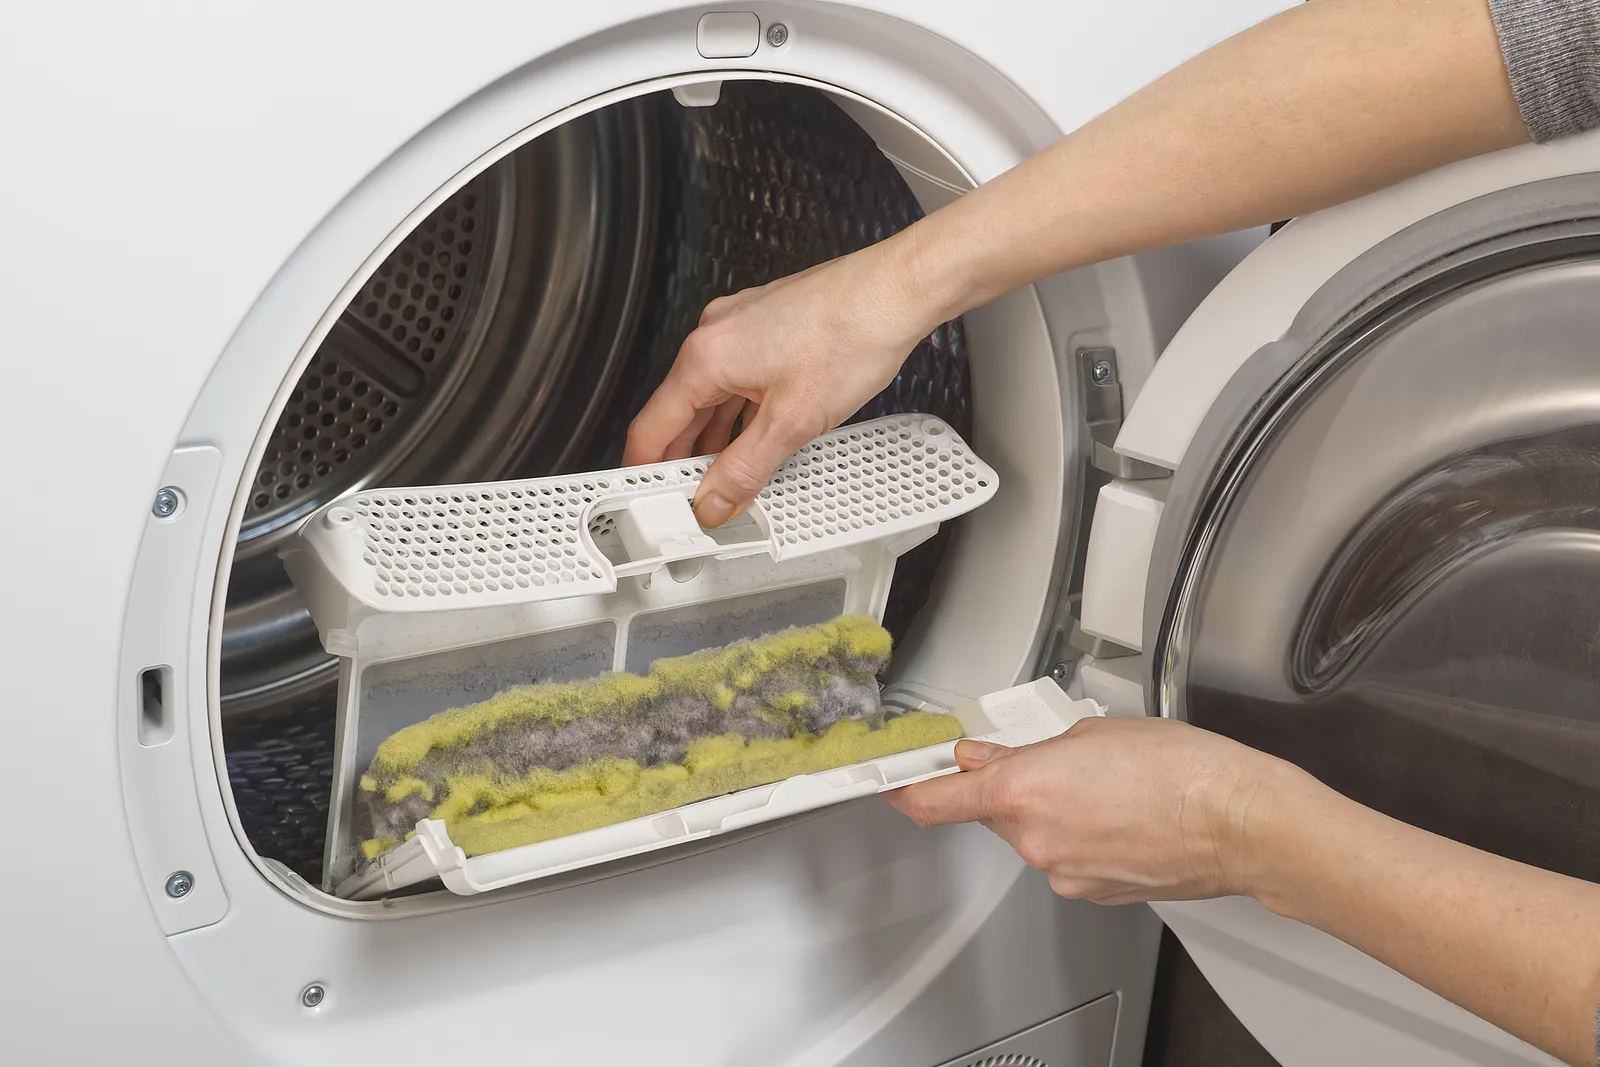 How To Clean A Clothes Dryer: Sanitize And Disinfect Yours Like A Pro